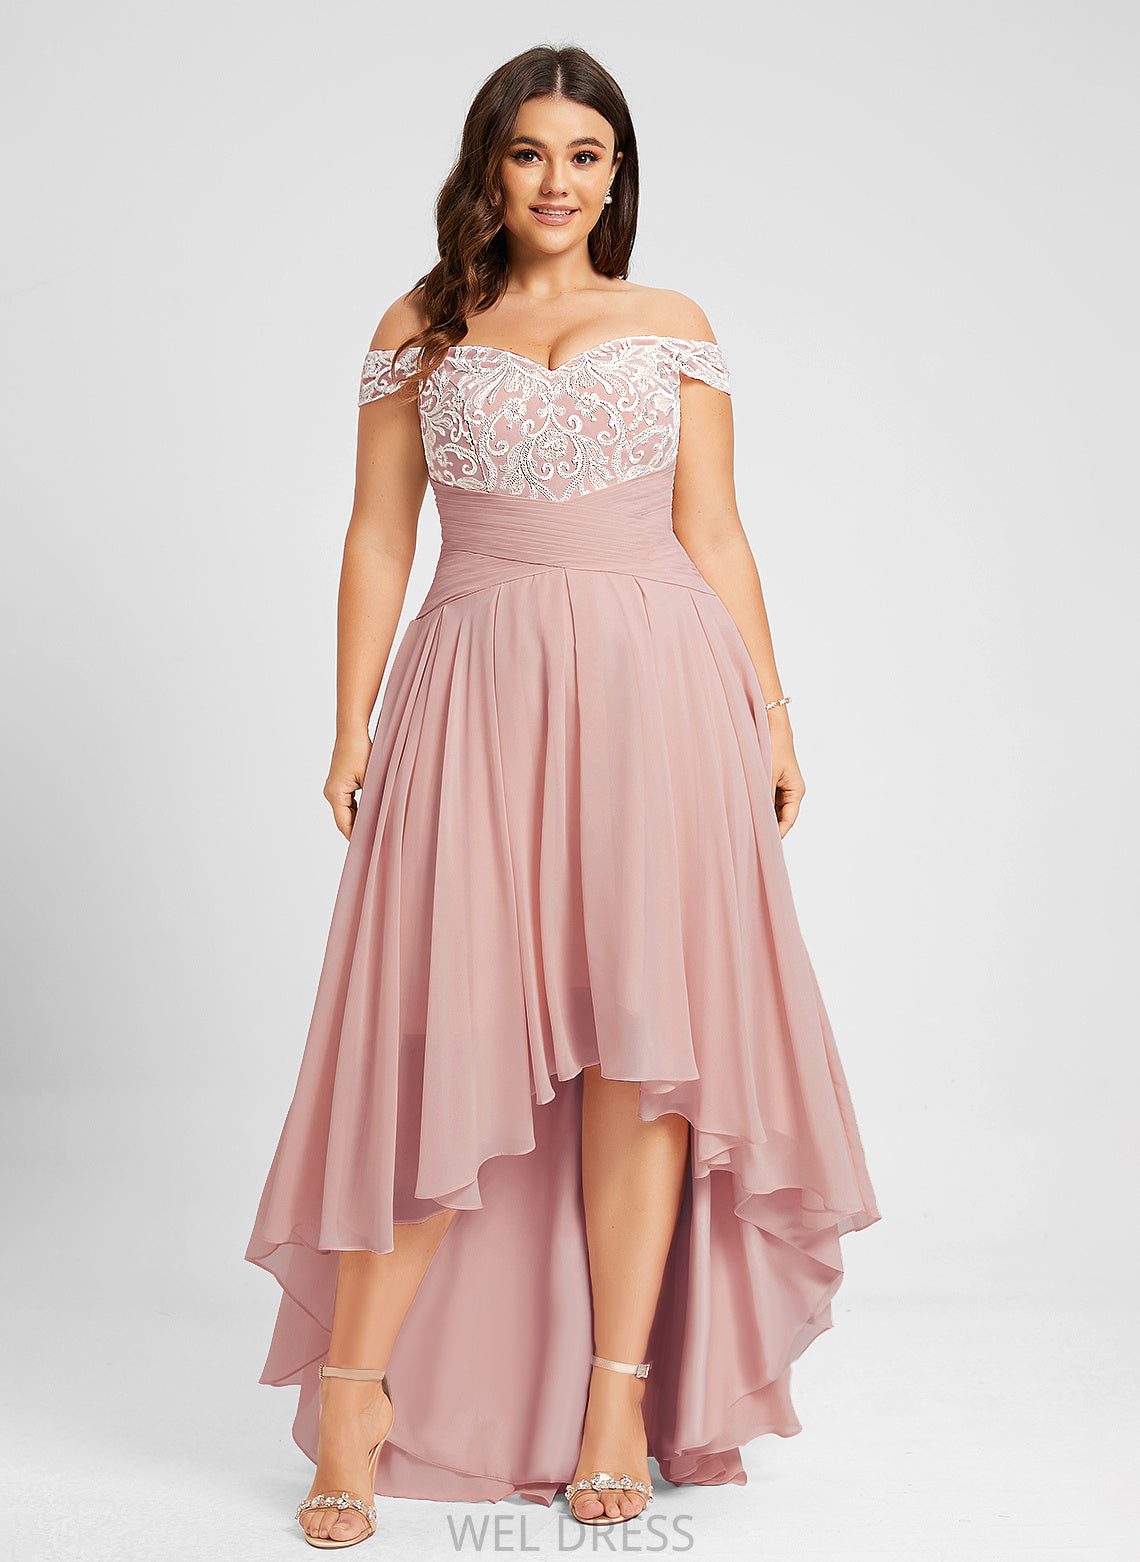 Lace Prom Dresses Pleated Chiffon With Off-the-Shoulder A-Line Brynn Asymmetrical